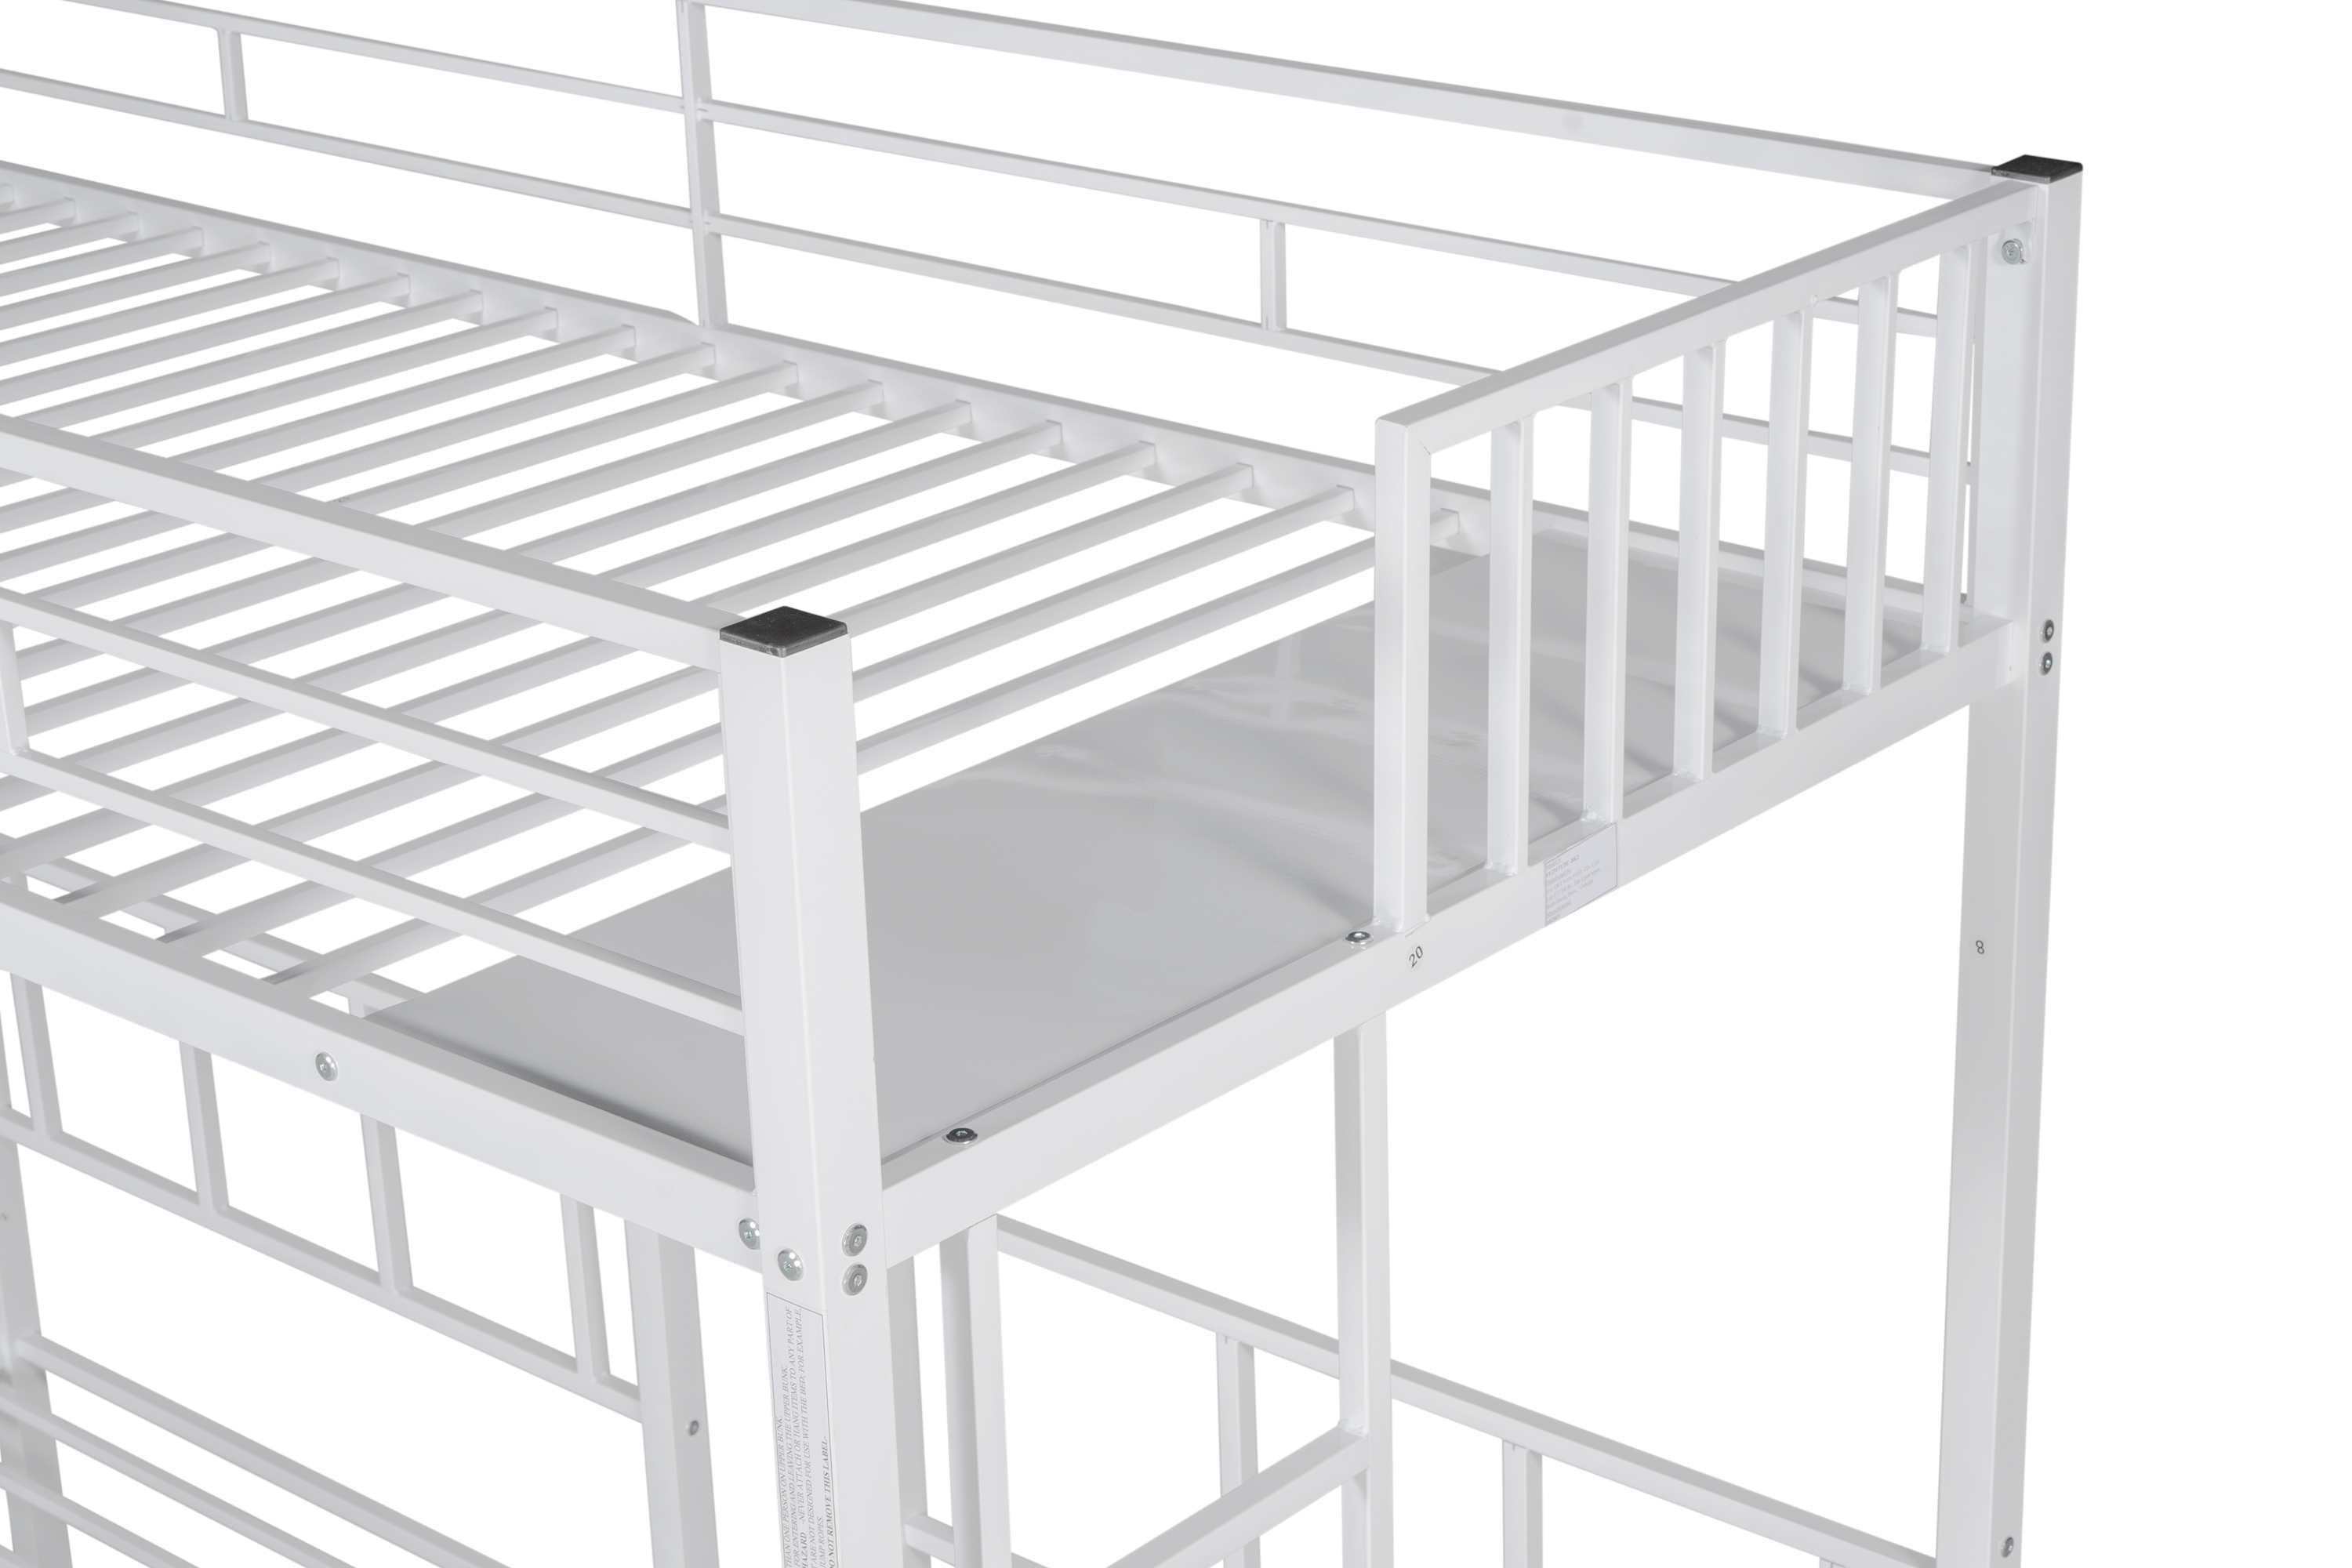 White Triple Twin Bunk Bed, Can Be Separated Into 3 Twin Beds, Suitable for Bedroom Living Room Dorm, 91.73"L x 77.95"W x 72.05"H, for Kids Adults Teens【2022 New】 - image 3 of 9